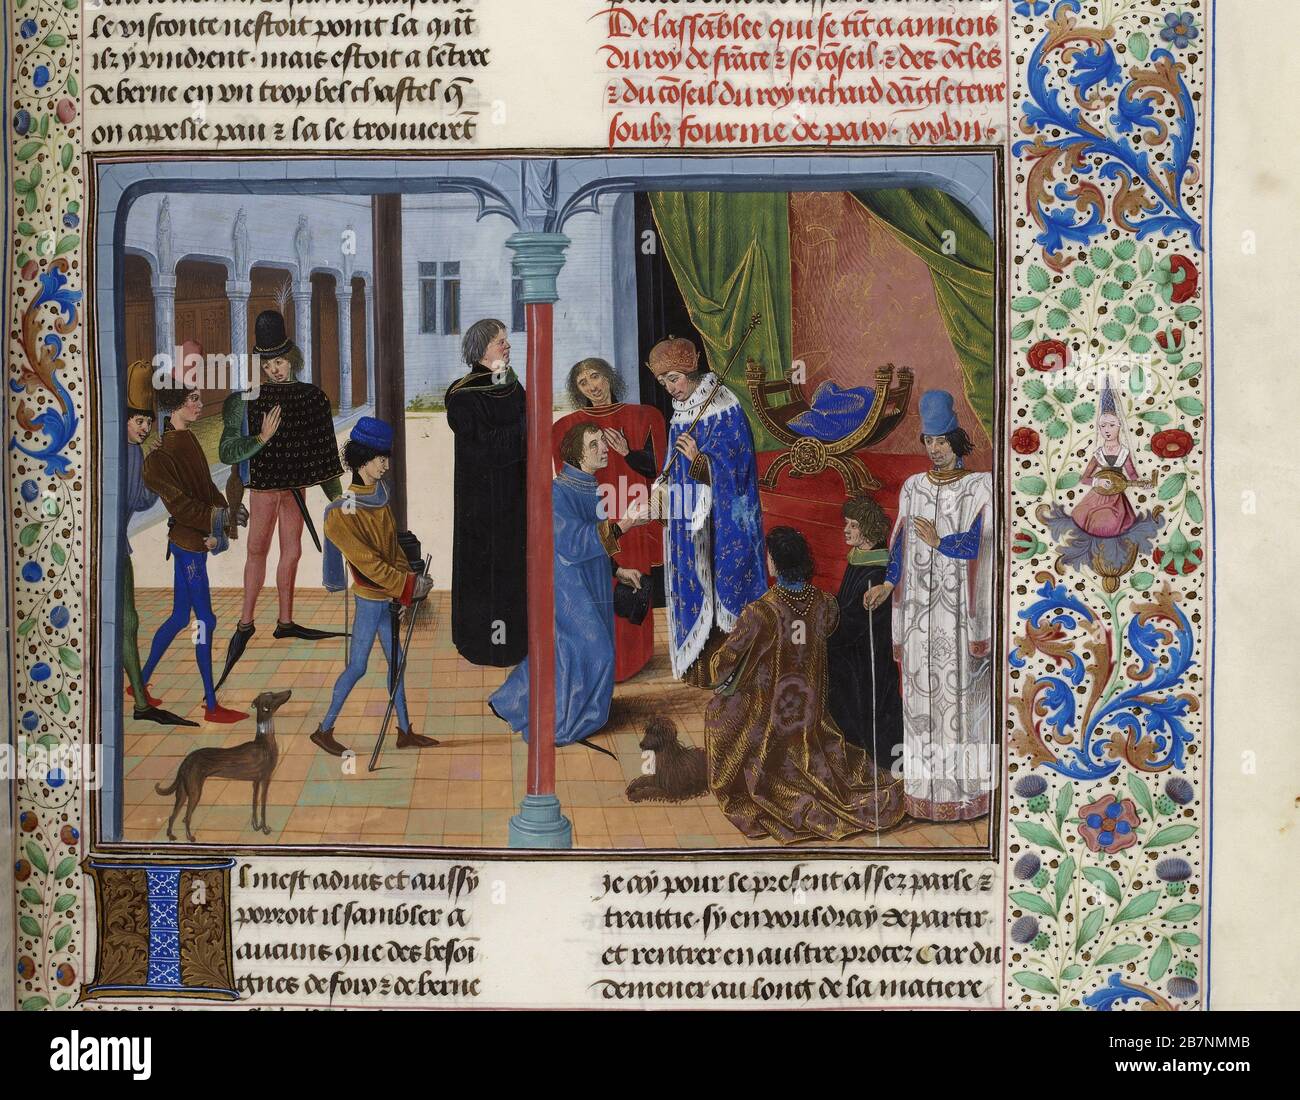 The Amiens Negotiations, 1392 (Miniature from the Grandes Chroniques de France by Jean Froissart), ca 1470-1475. Found in the Collection of Biblioth&#xe8;que Nationale de France. Stock Photo